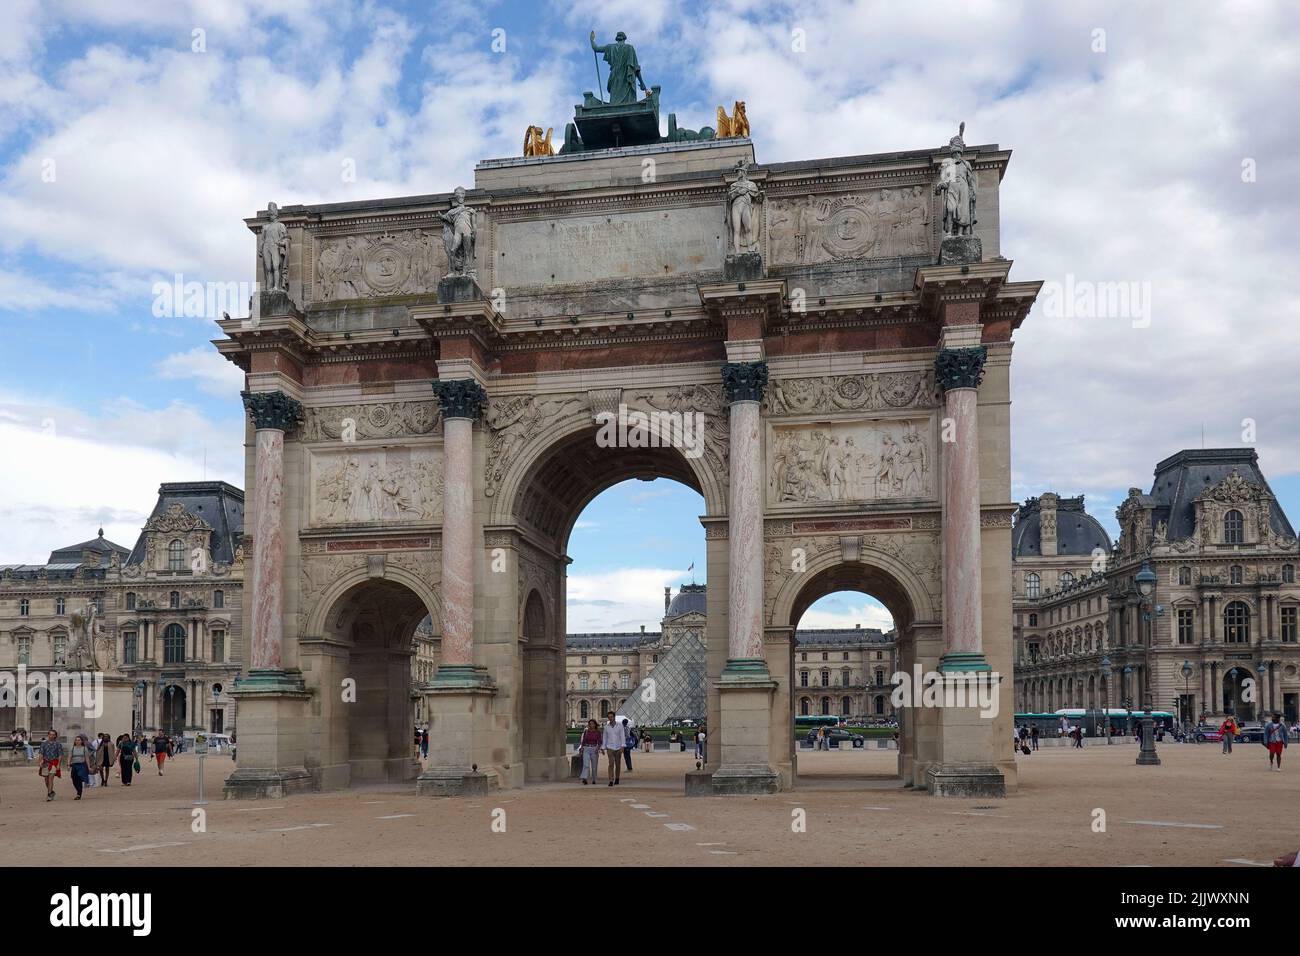 France, Paris, The Arc de Triomphe du Carrousel is a triumphal arch in Paris, located in the Place du Carrousel. It is an example of Neoclassical arch Stock Photo